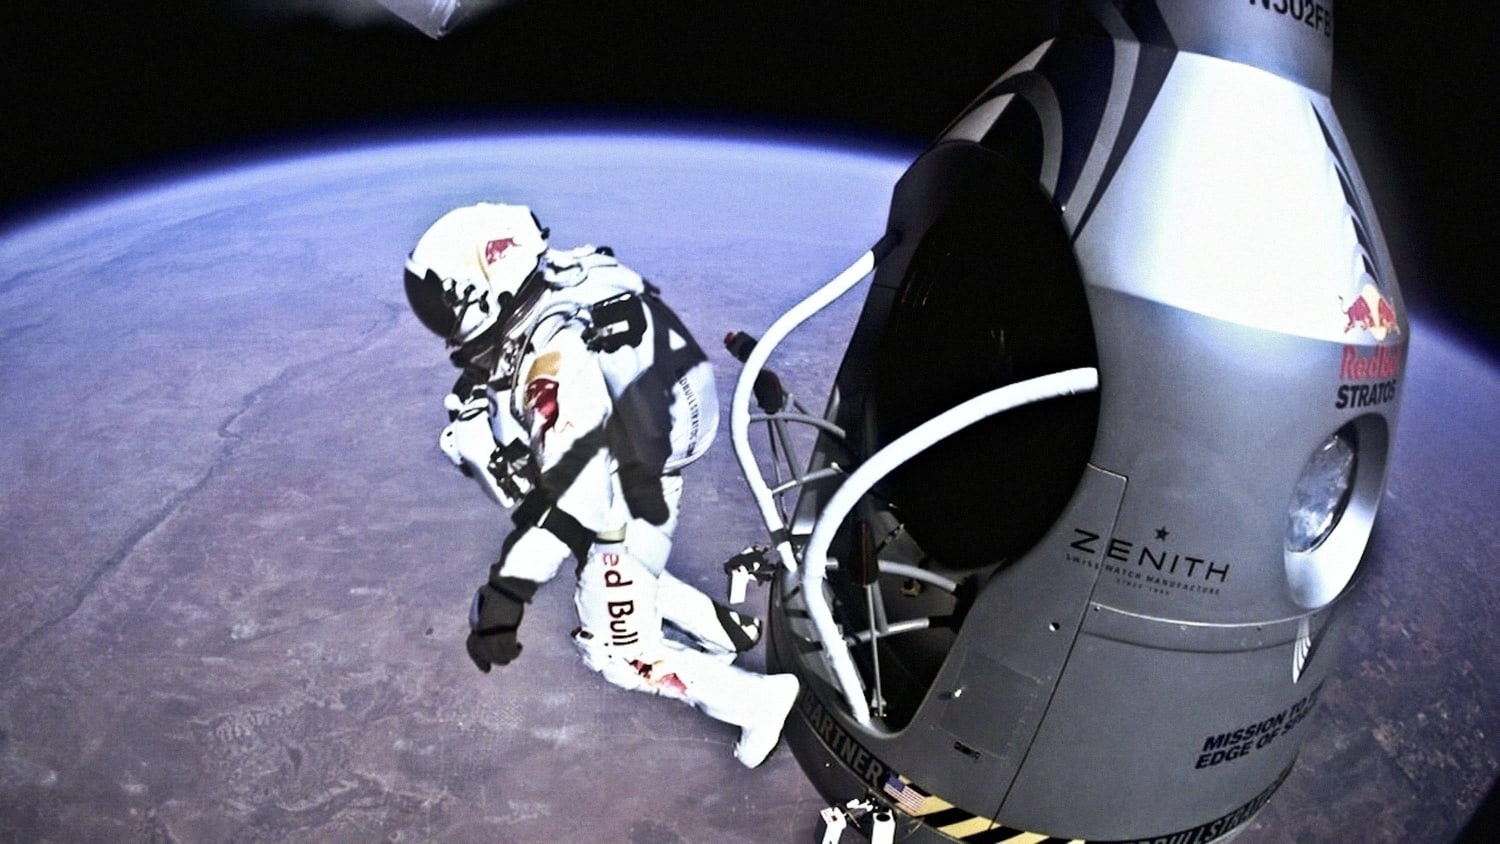 Red Bull Stratos: facts, and